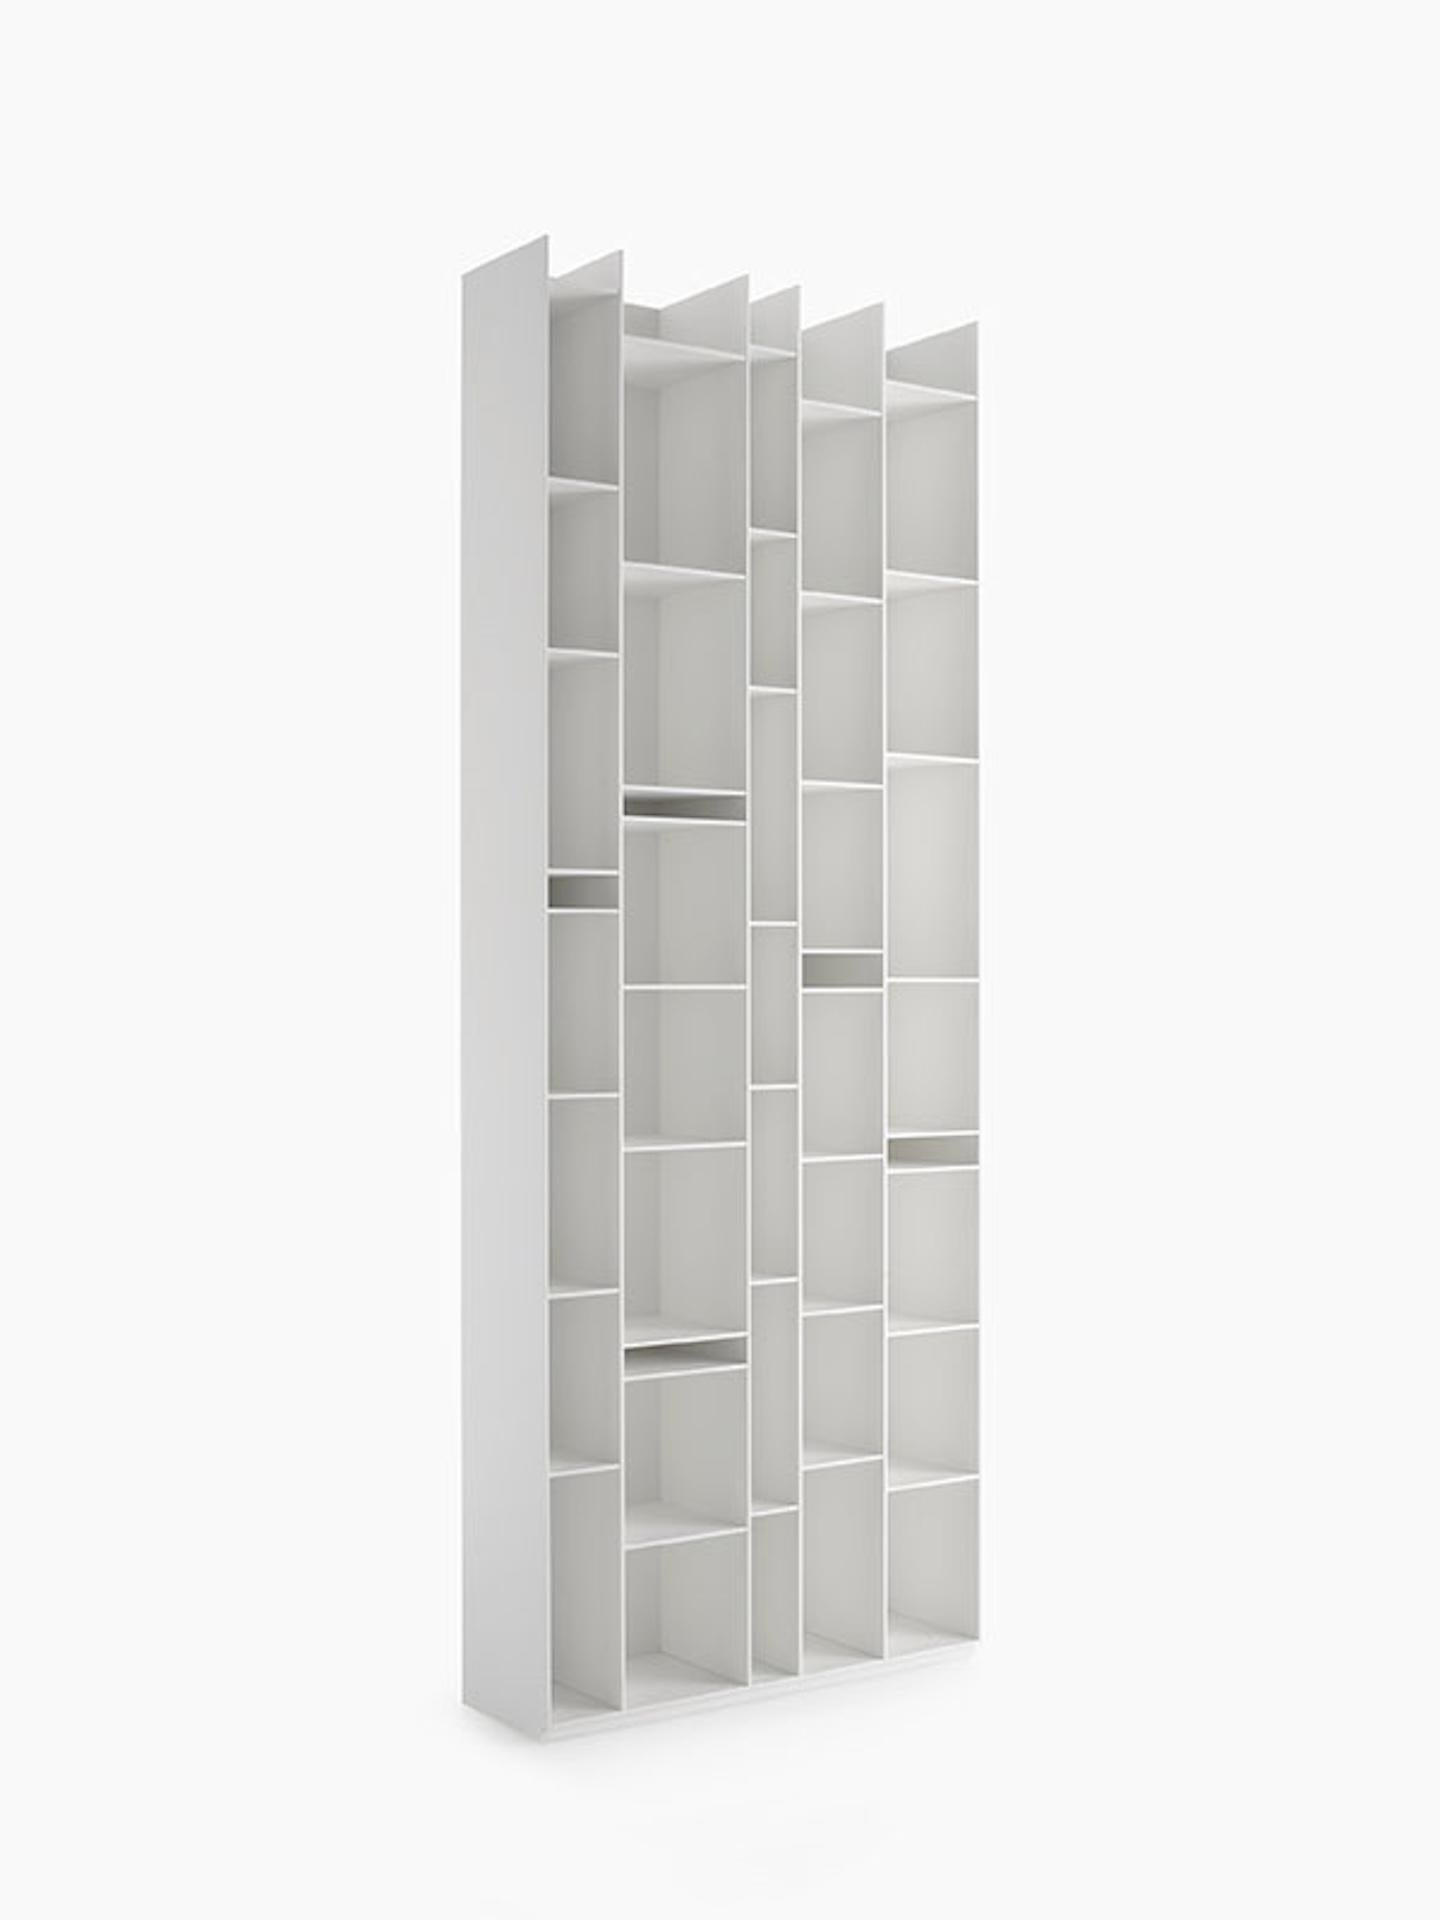 Contemporary MDF Italia Customizable Random Bookcase by Neuland Industriede For Sale